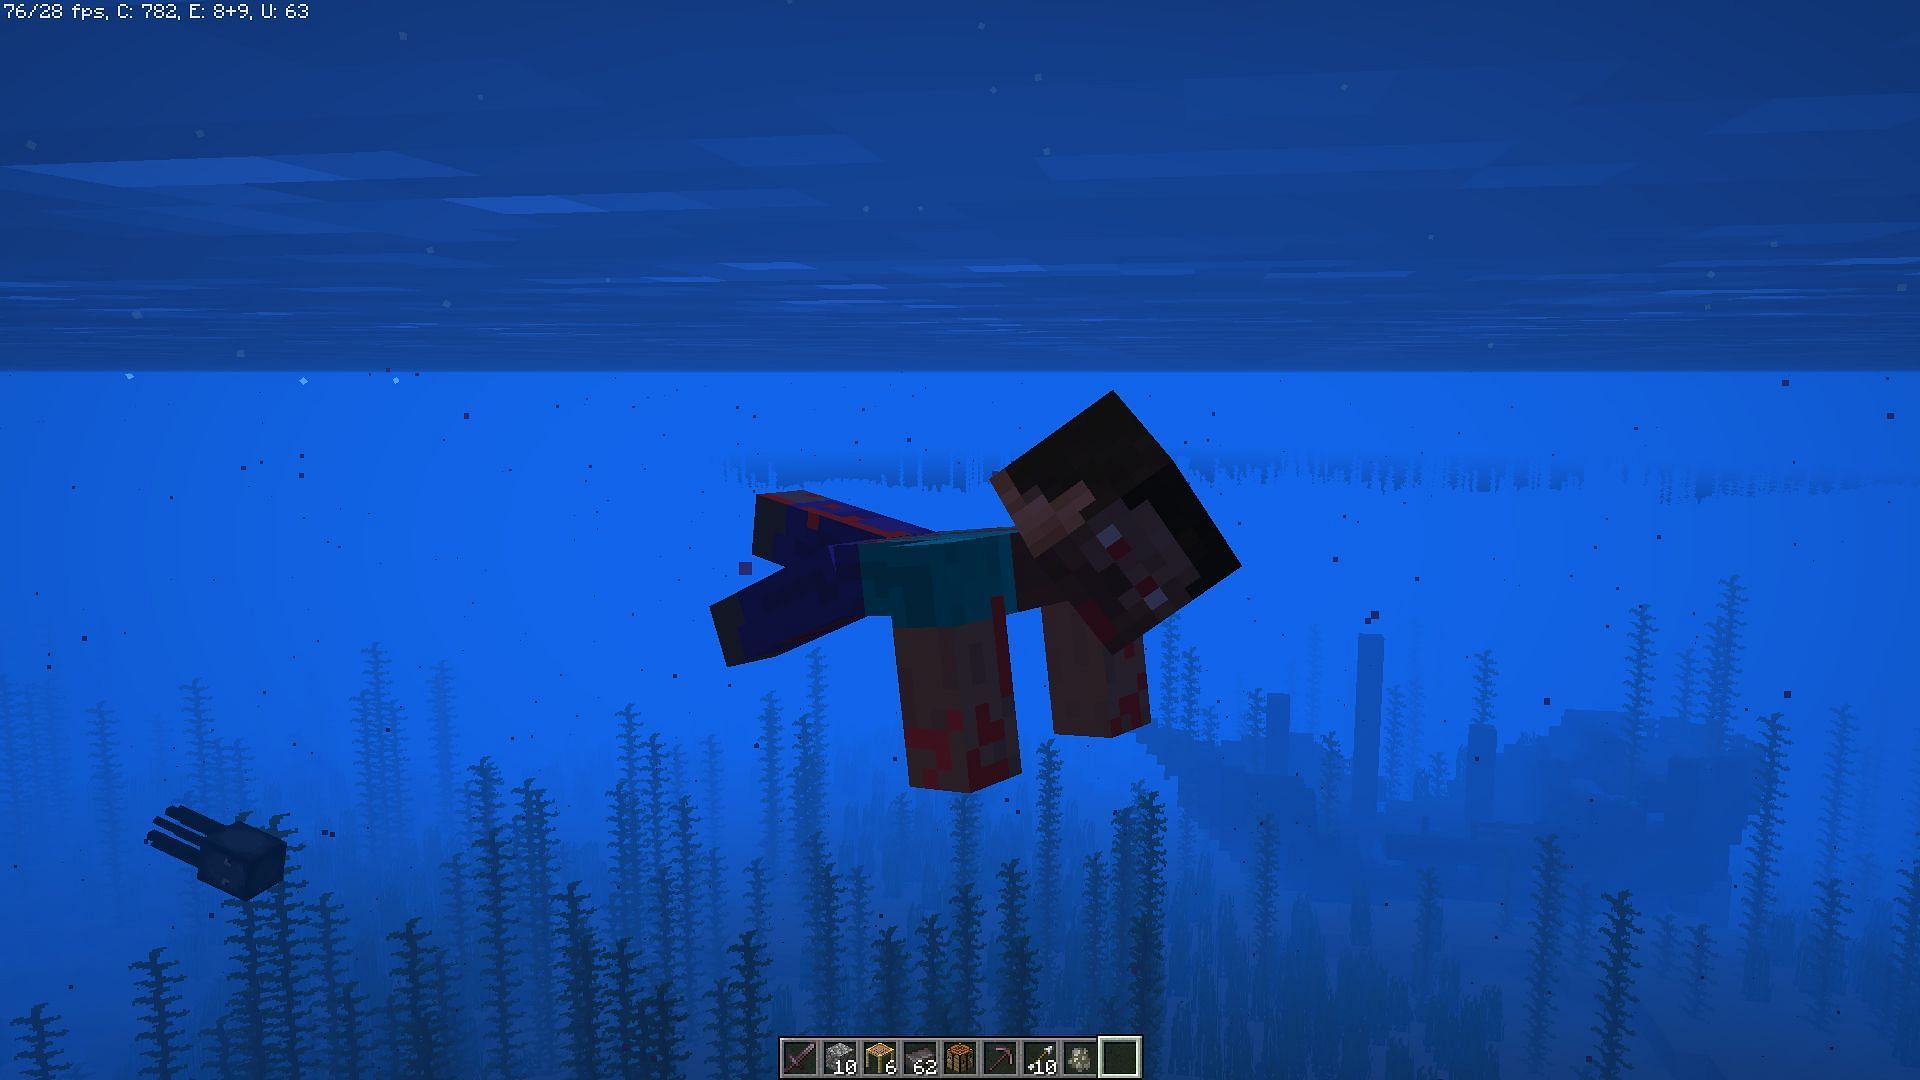 Players can swim faster with Depth Strider enchanted boots in Minecraft (Image via Mojang)